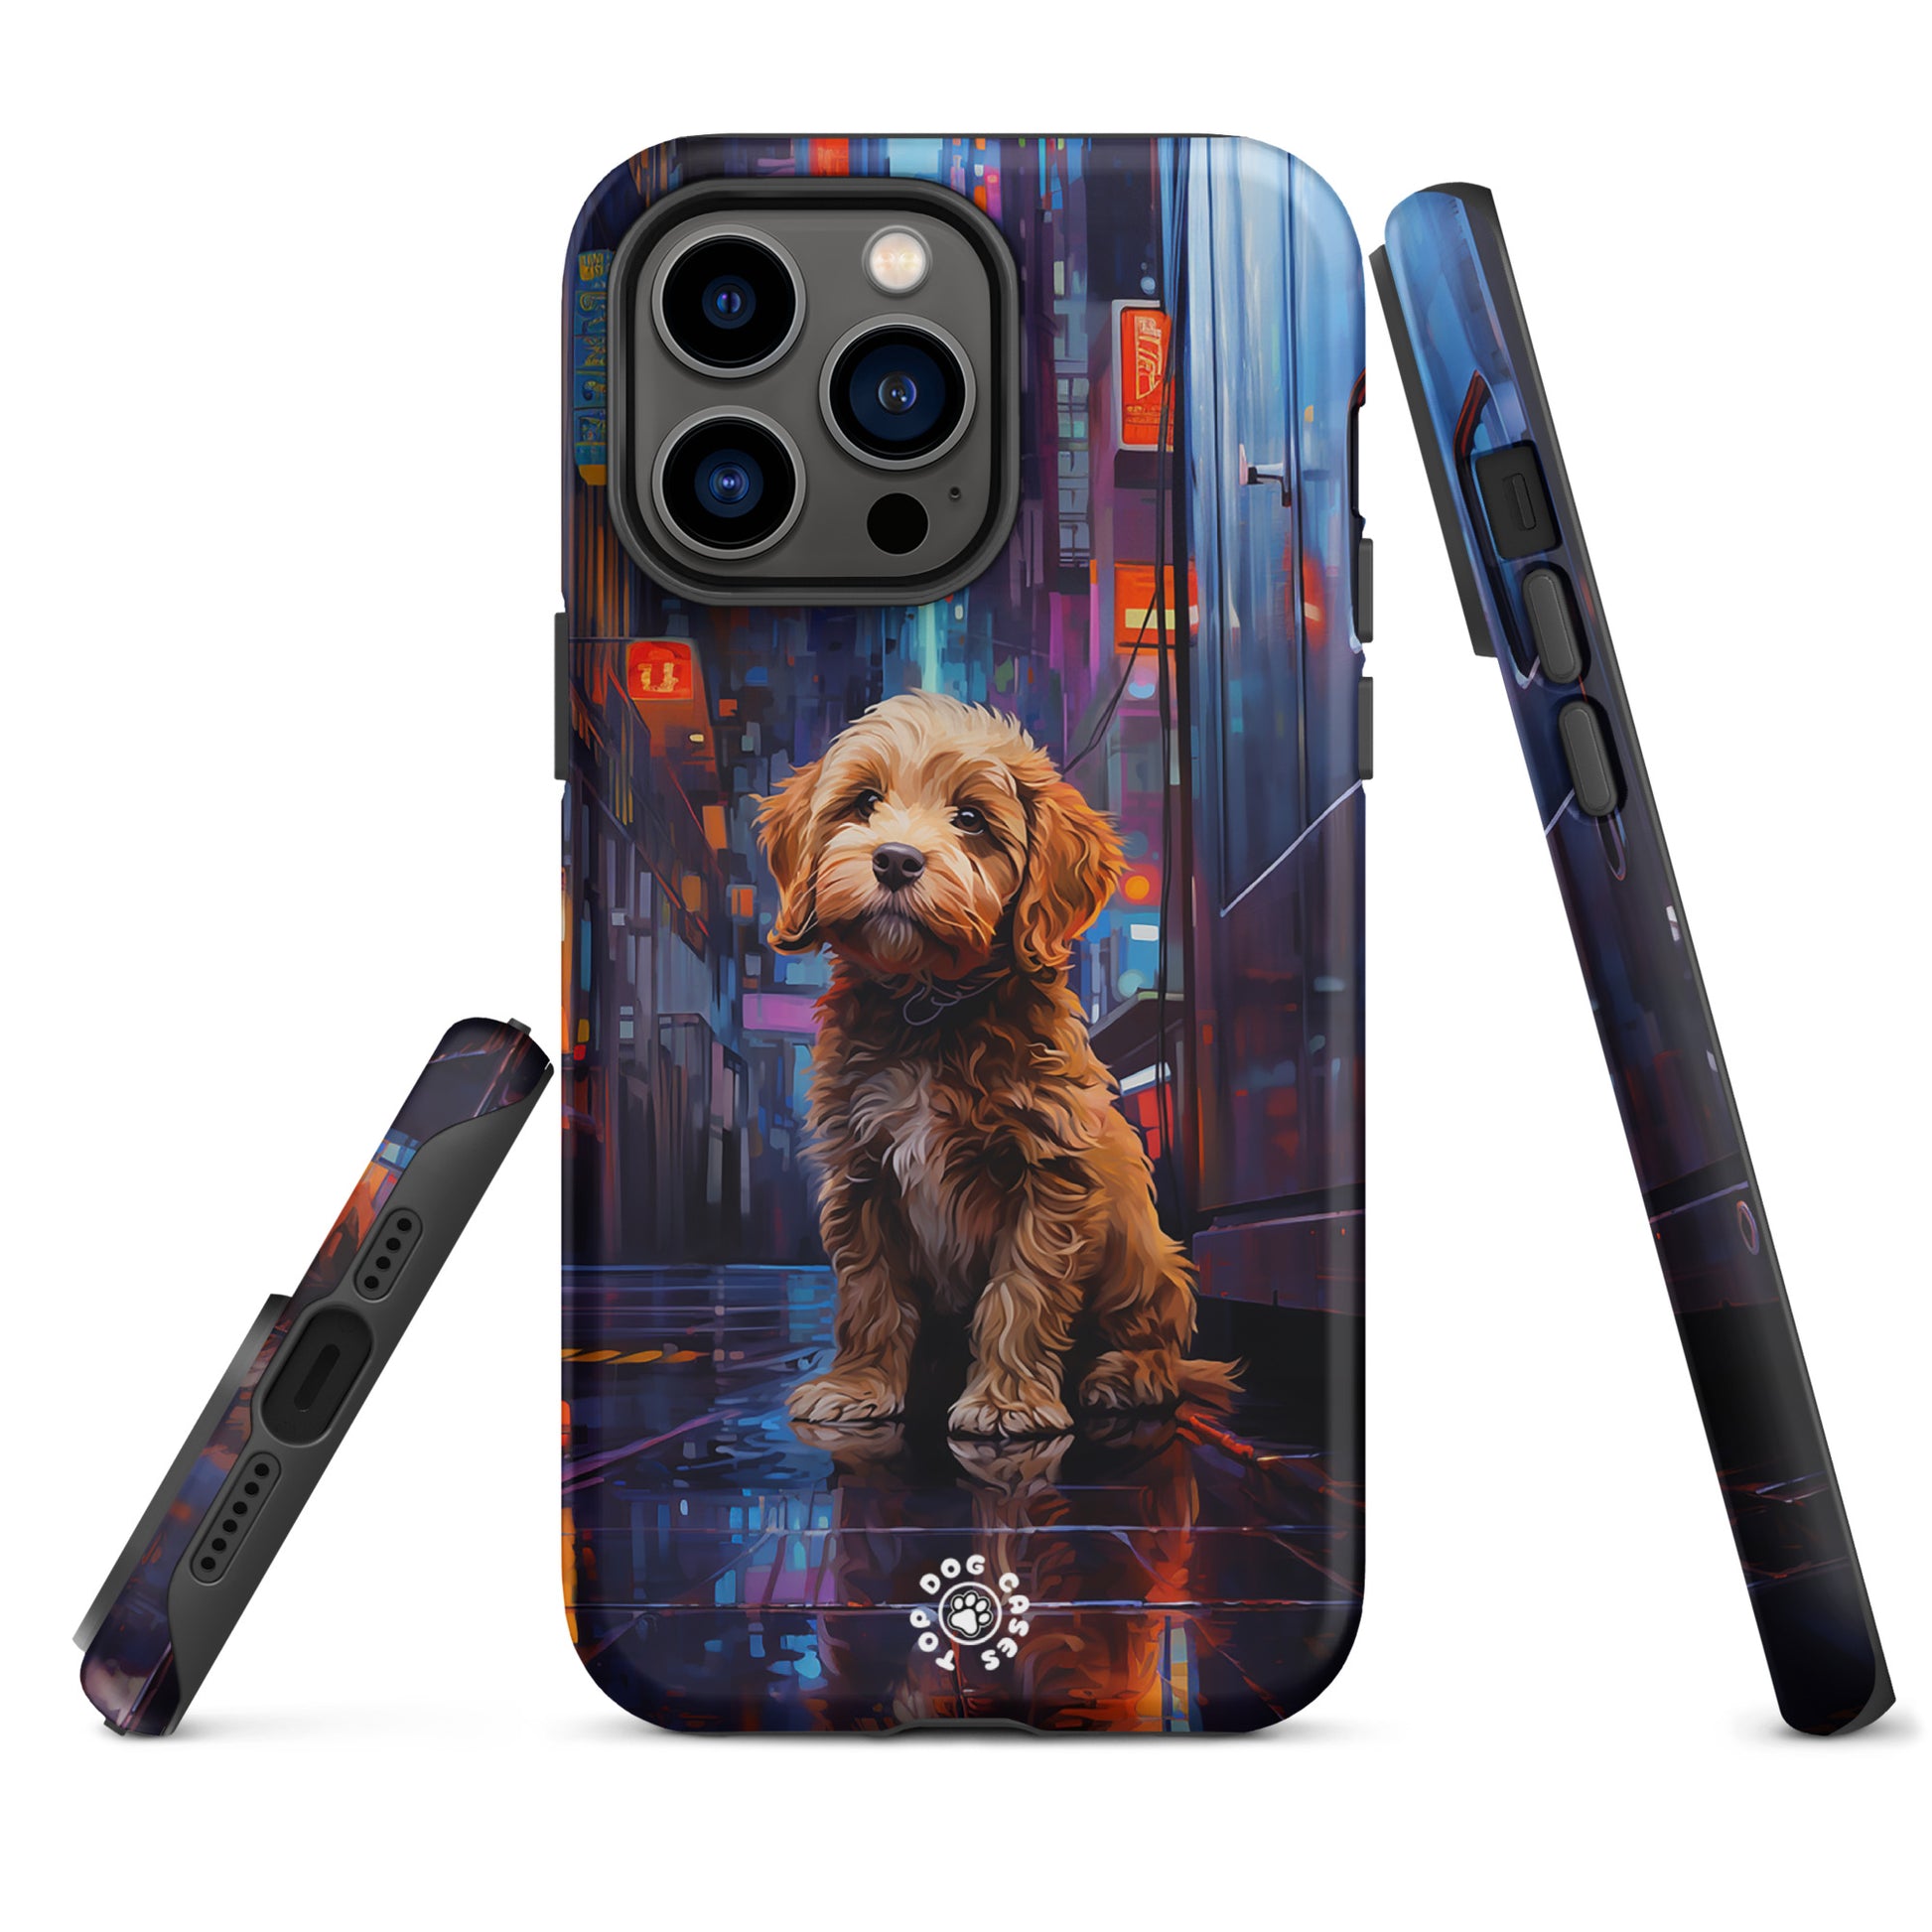 Goldendoodle in the City - iPhone Case - Cute Phone Cases - Top Dog Cases - #CuteDog, #CuteDogs, #Goldendoodle, #iPhone, #iPhone11, #iphone11case, #iPhone12, #iPhone12case, #iPhone13, #iPhone13case, #iPhone13DogCase, #iPhone13Mini, #iPhone13Pro, #iPhone13ProMax, #iPhone14, #iPhone14case, #iPhone14DogCase, #iPhone14Plus, #iPhone14Pluscase, #iPhone14Pro, #iPhone14ProMax, #iPhone14ProMaxCase, #iPhone15, #iPhone15case, #iPhonecase, #iphonedogcase, #MiniGoldendoodle, #MiniGoldendoodleCase